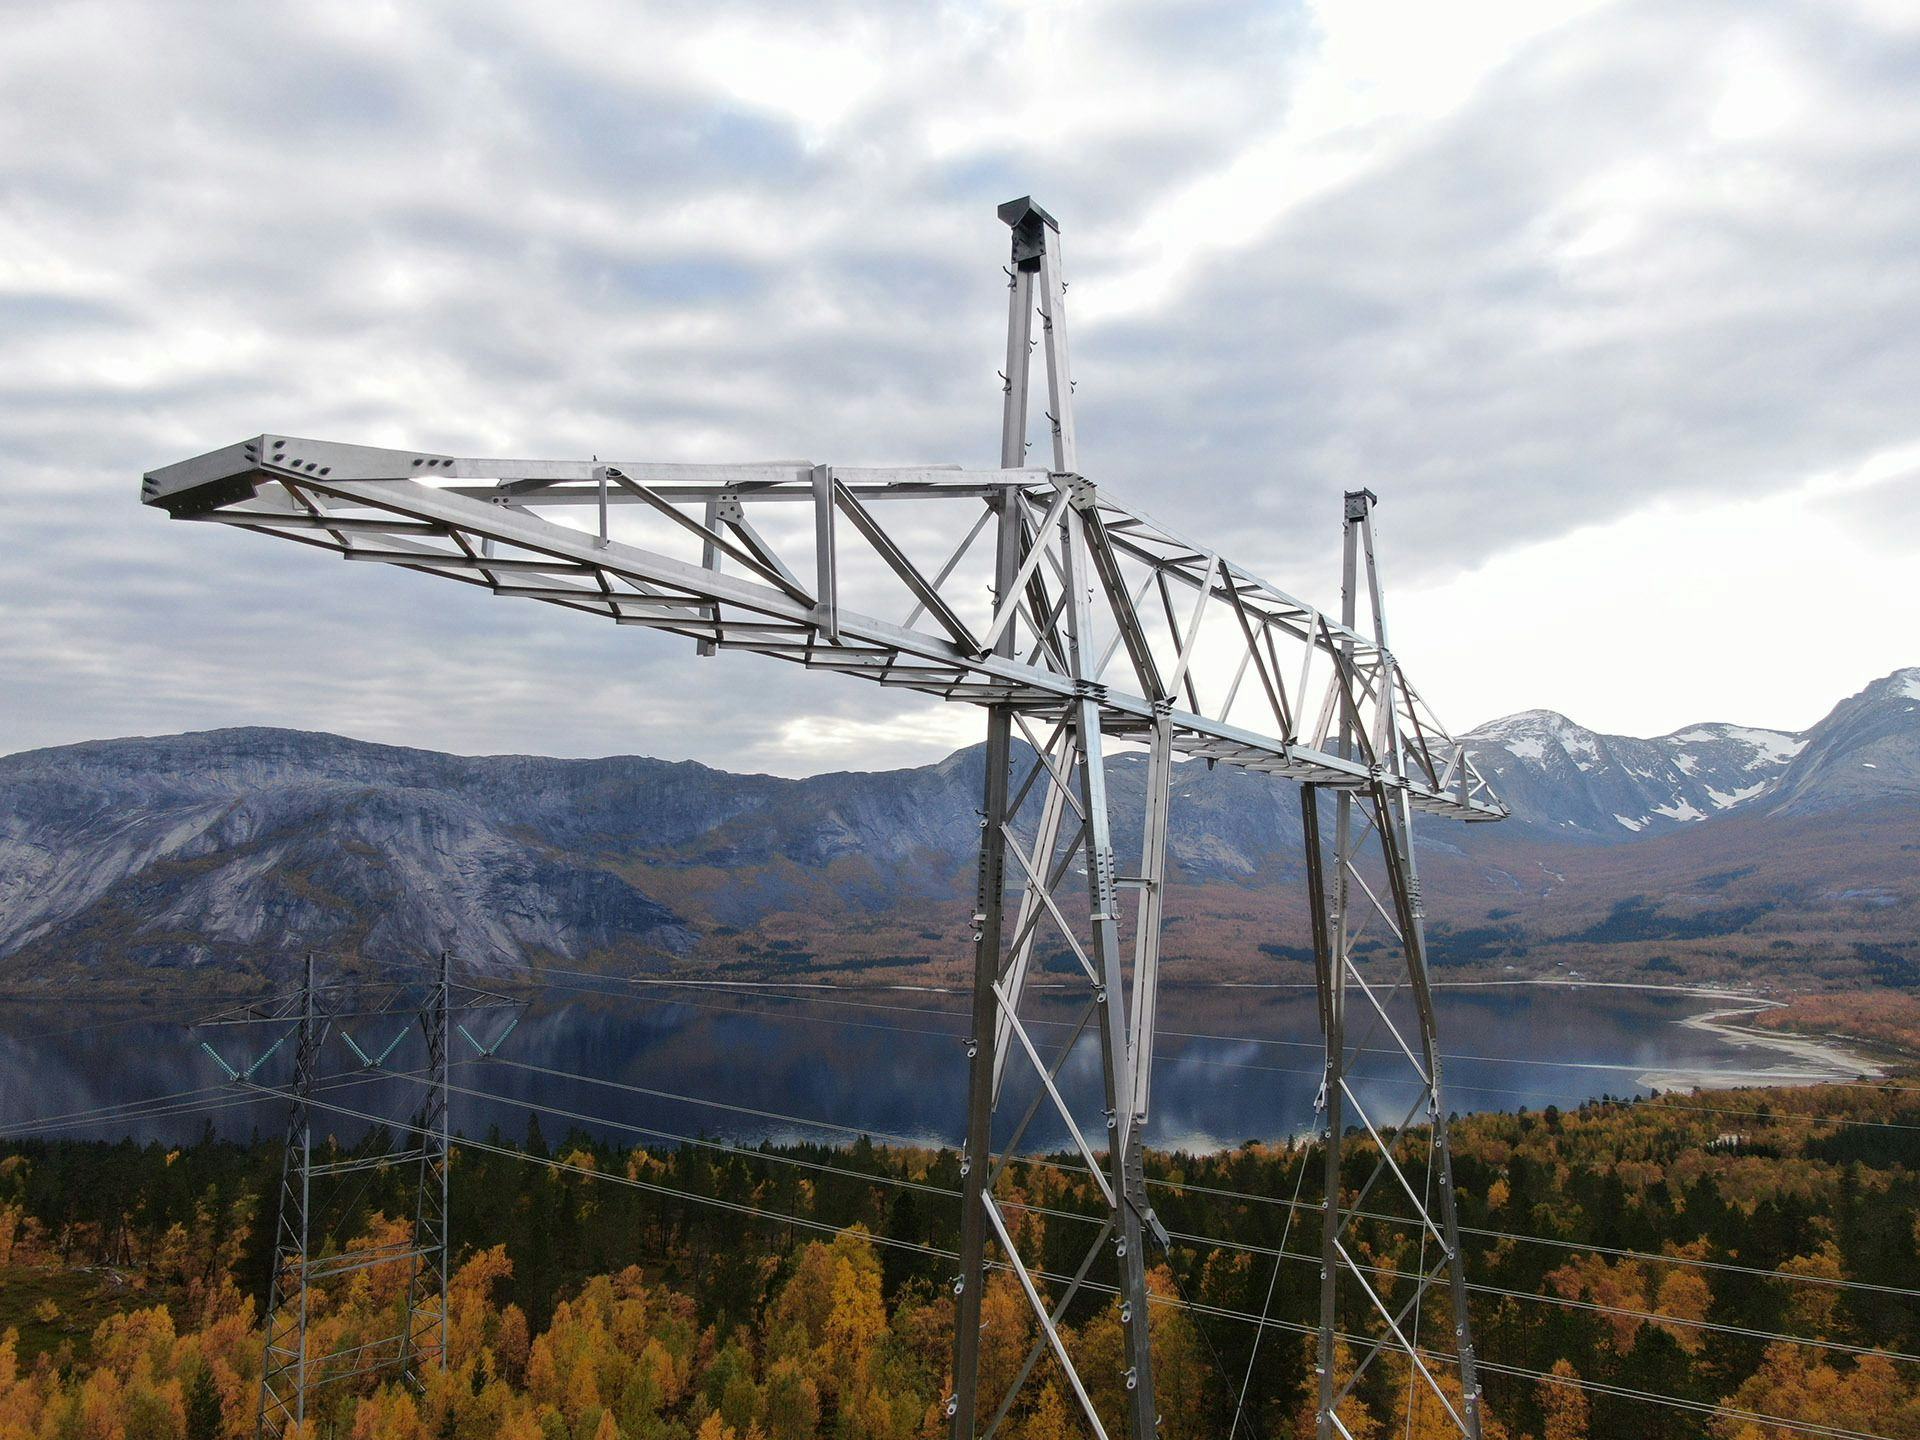 A large electricity pylon with mountainous landscape in the background